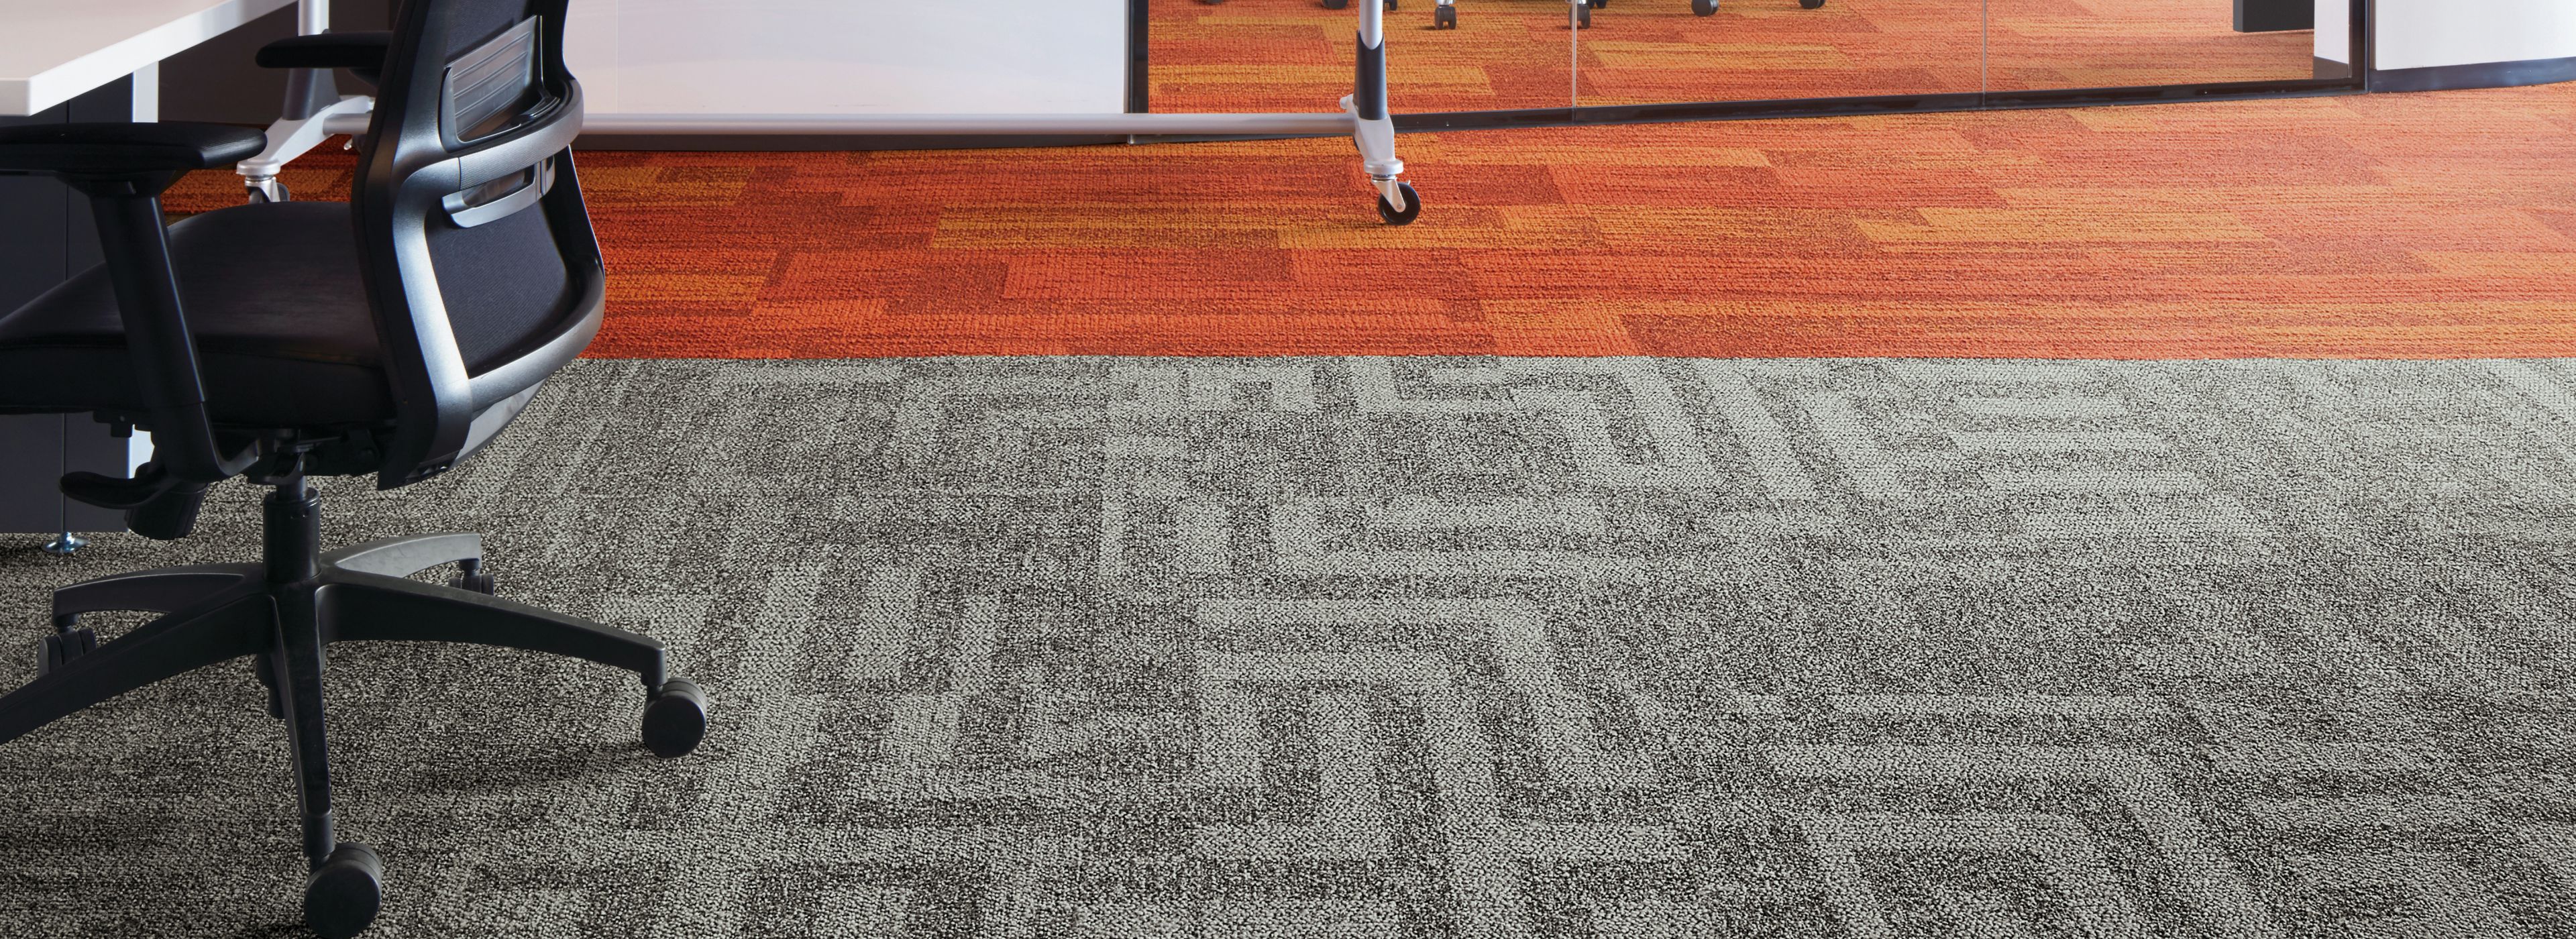 Interface Open Air 414 carpet tile with AE317 plank carpet tile in corner workstation with whiteboard and meeting room in background image number 1